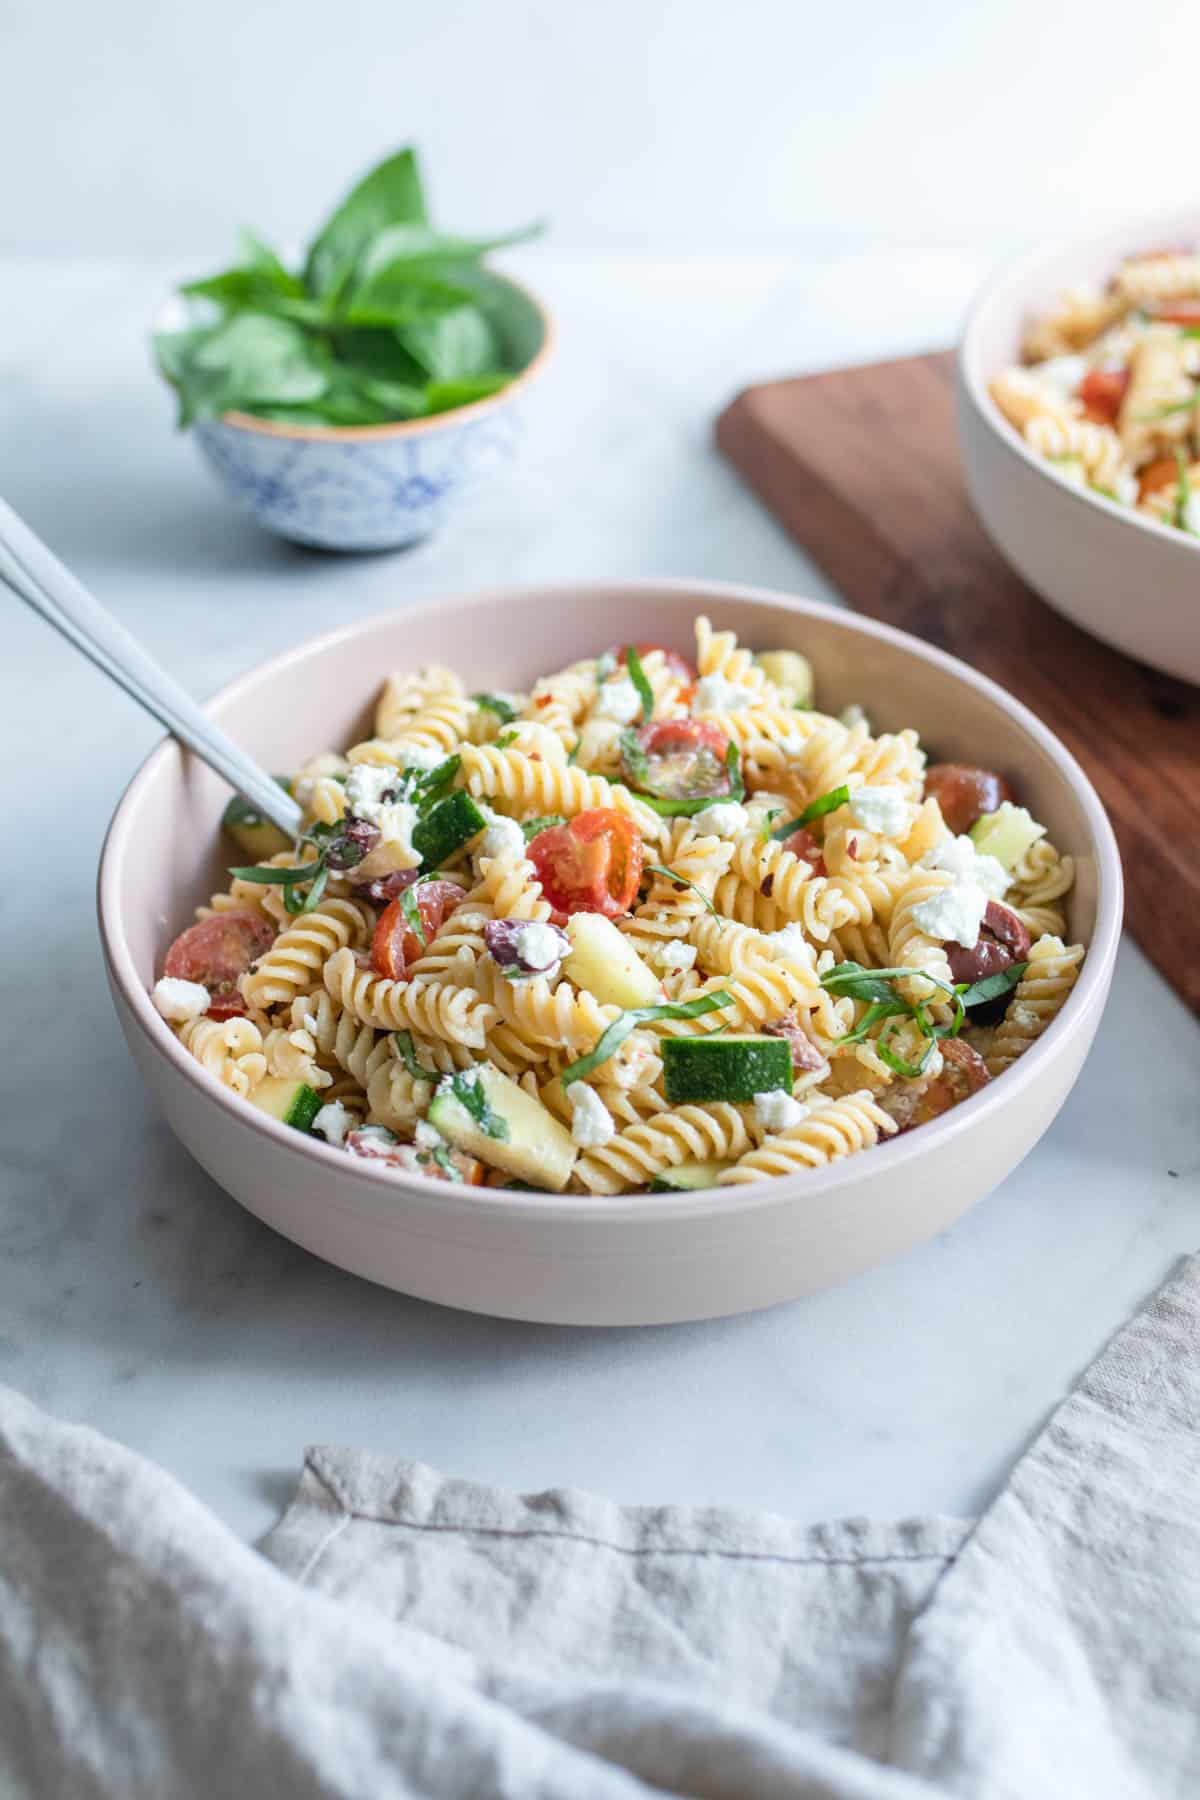 A bowl of chickpea pasta salad with a fork.